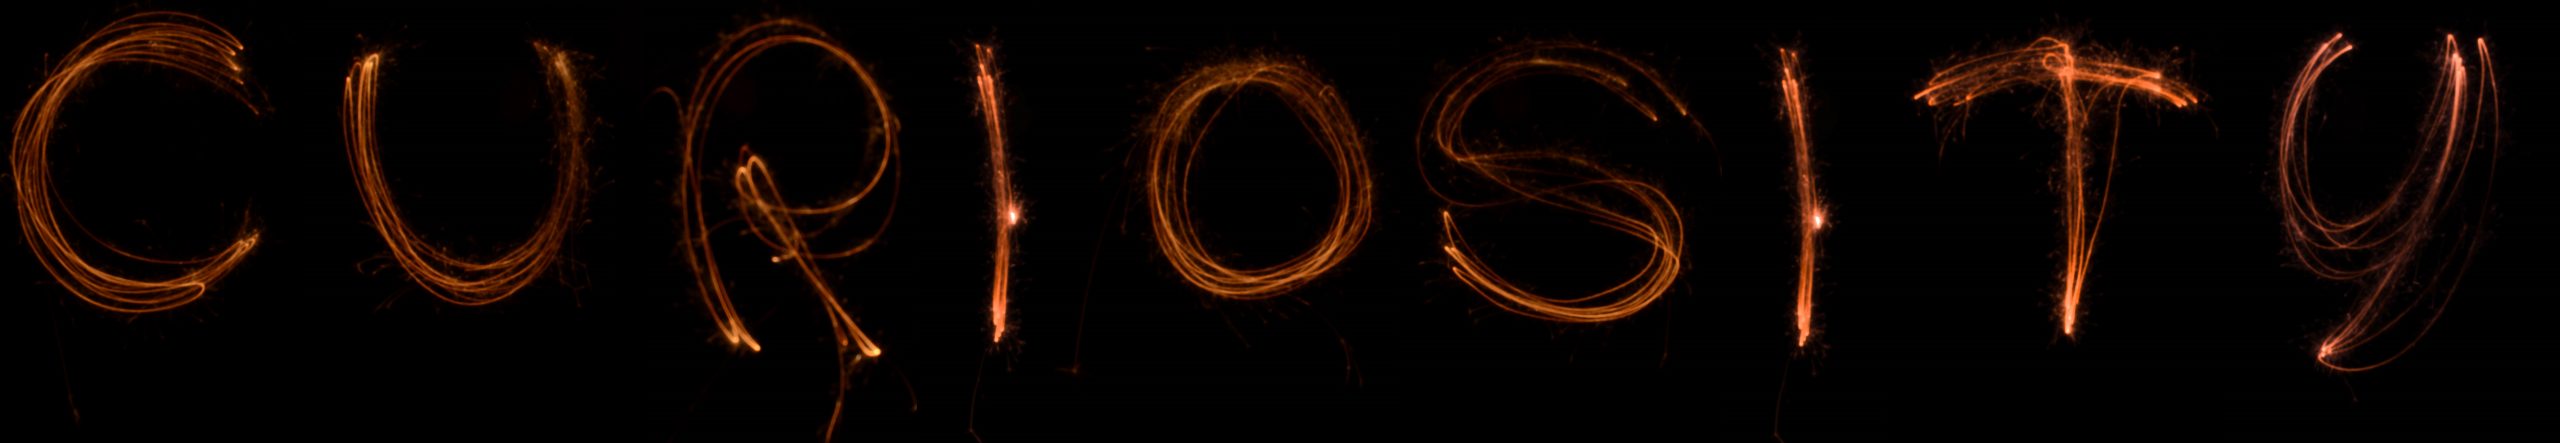 Curiosity spelled out with sparklers